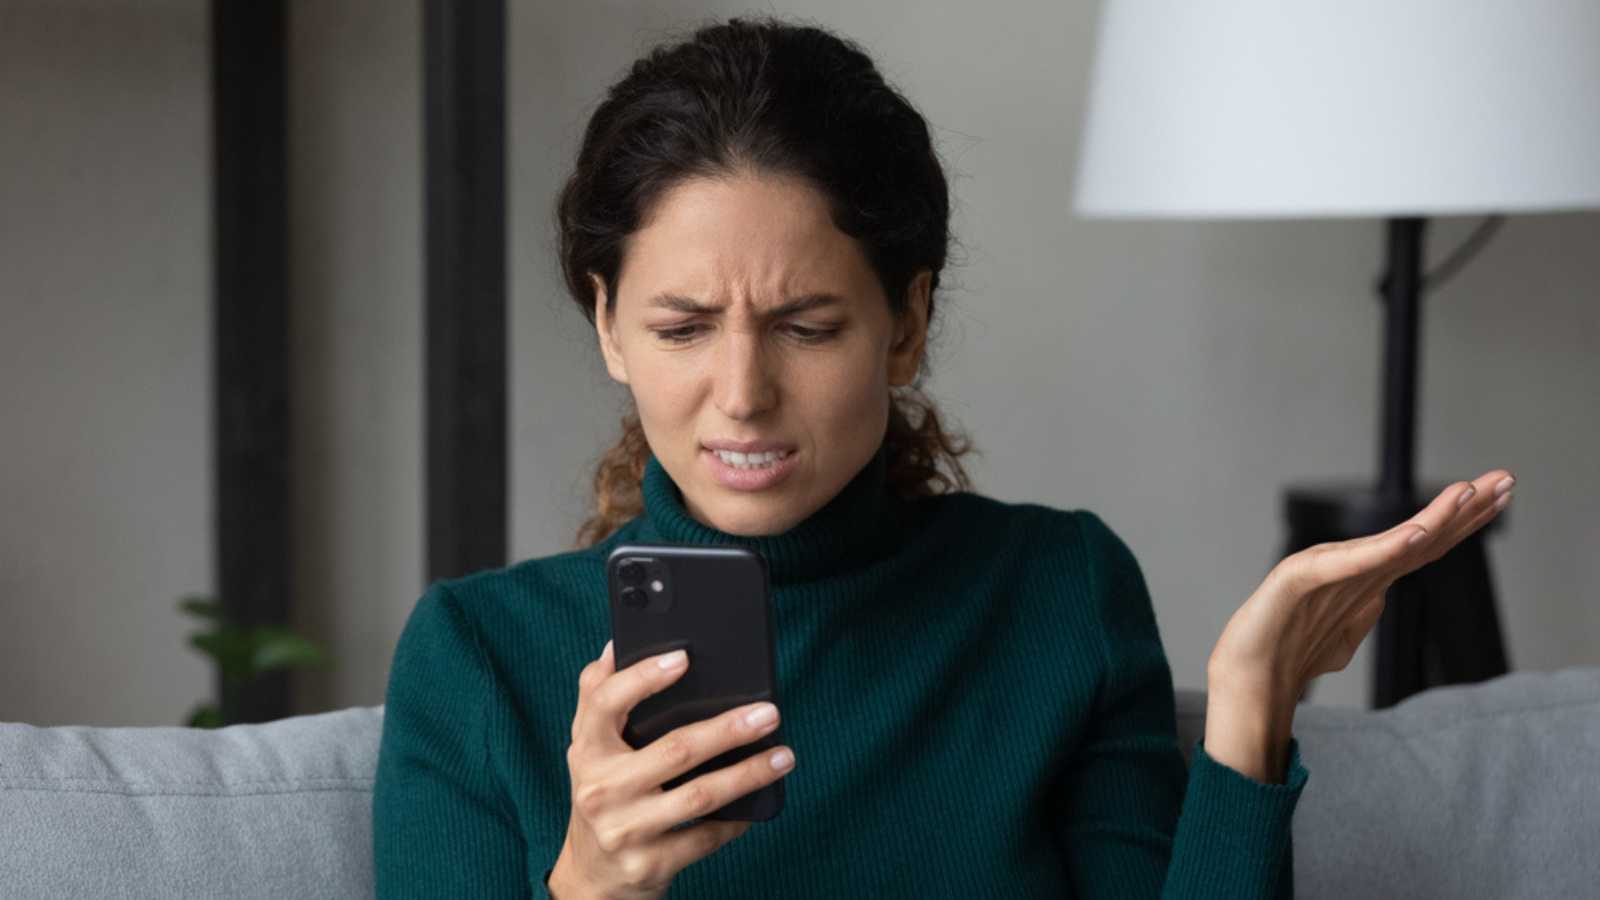 Woman Annoyed On Seeing Mobile